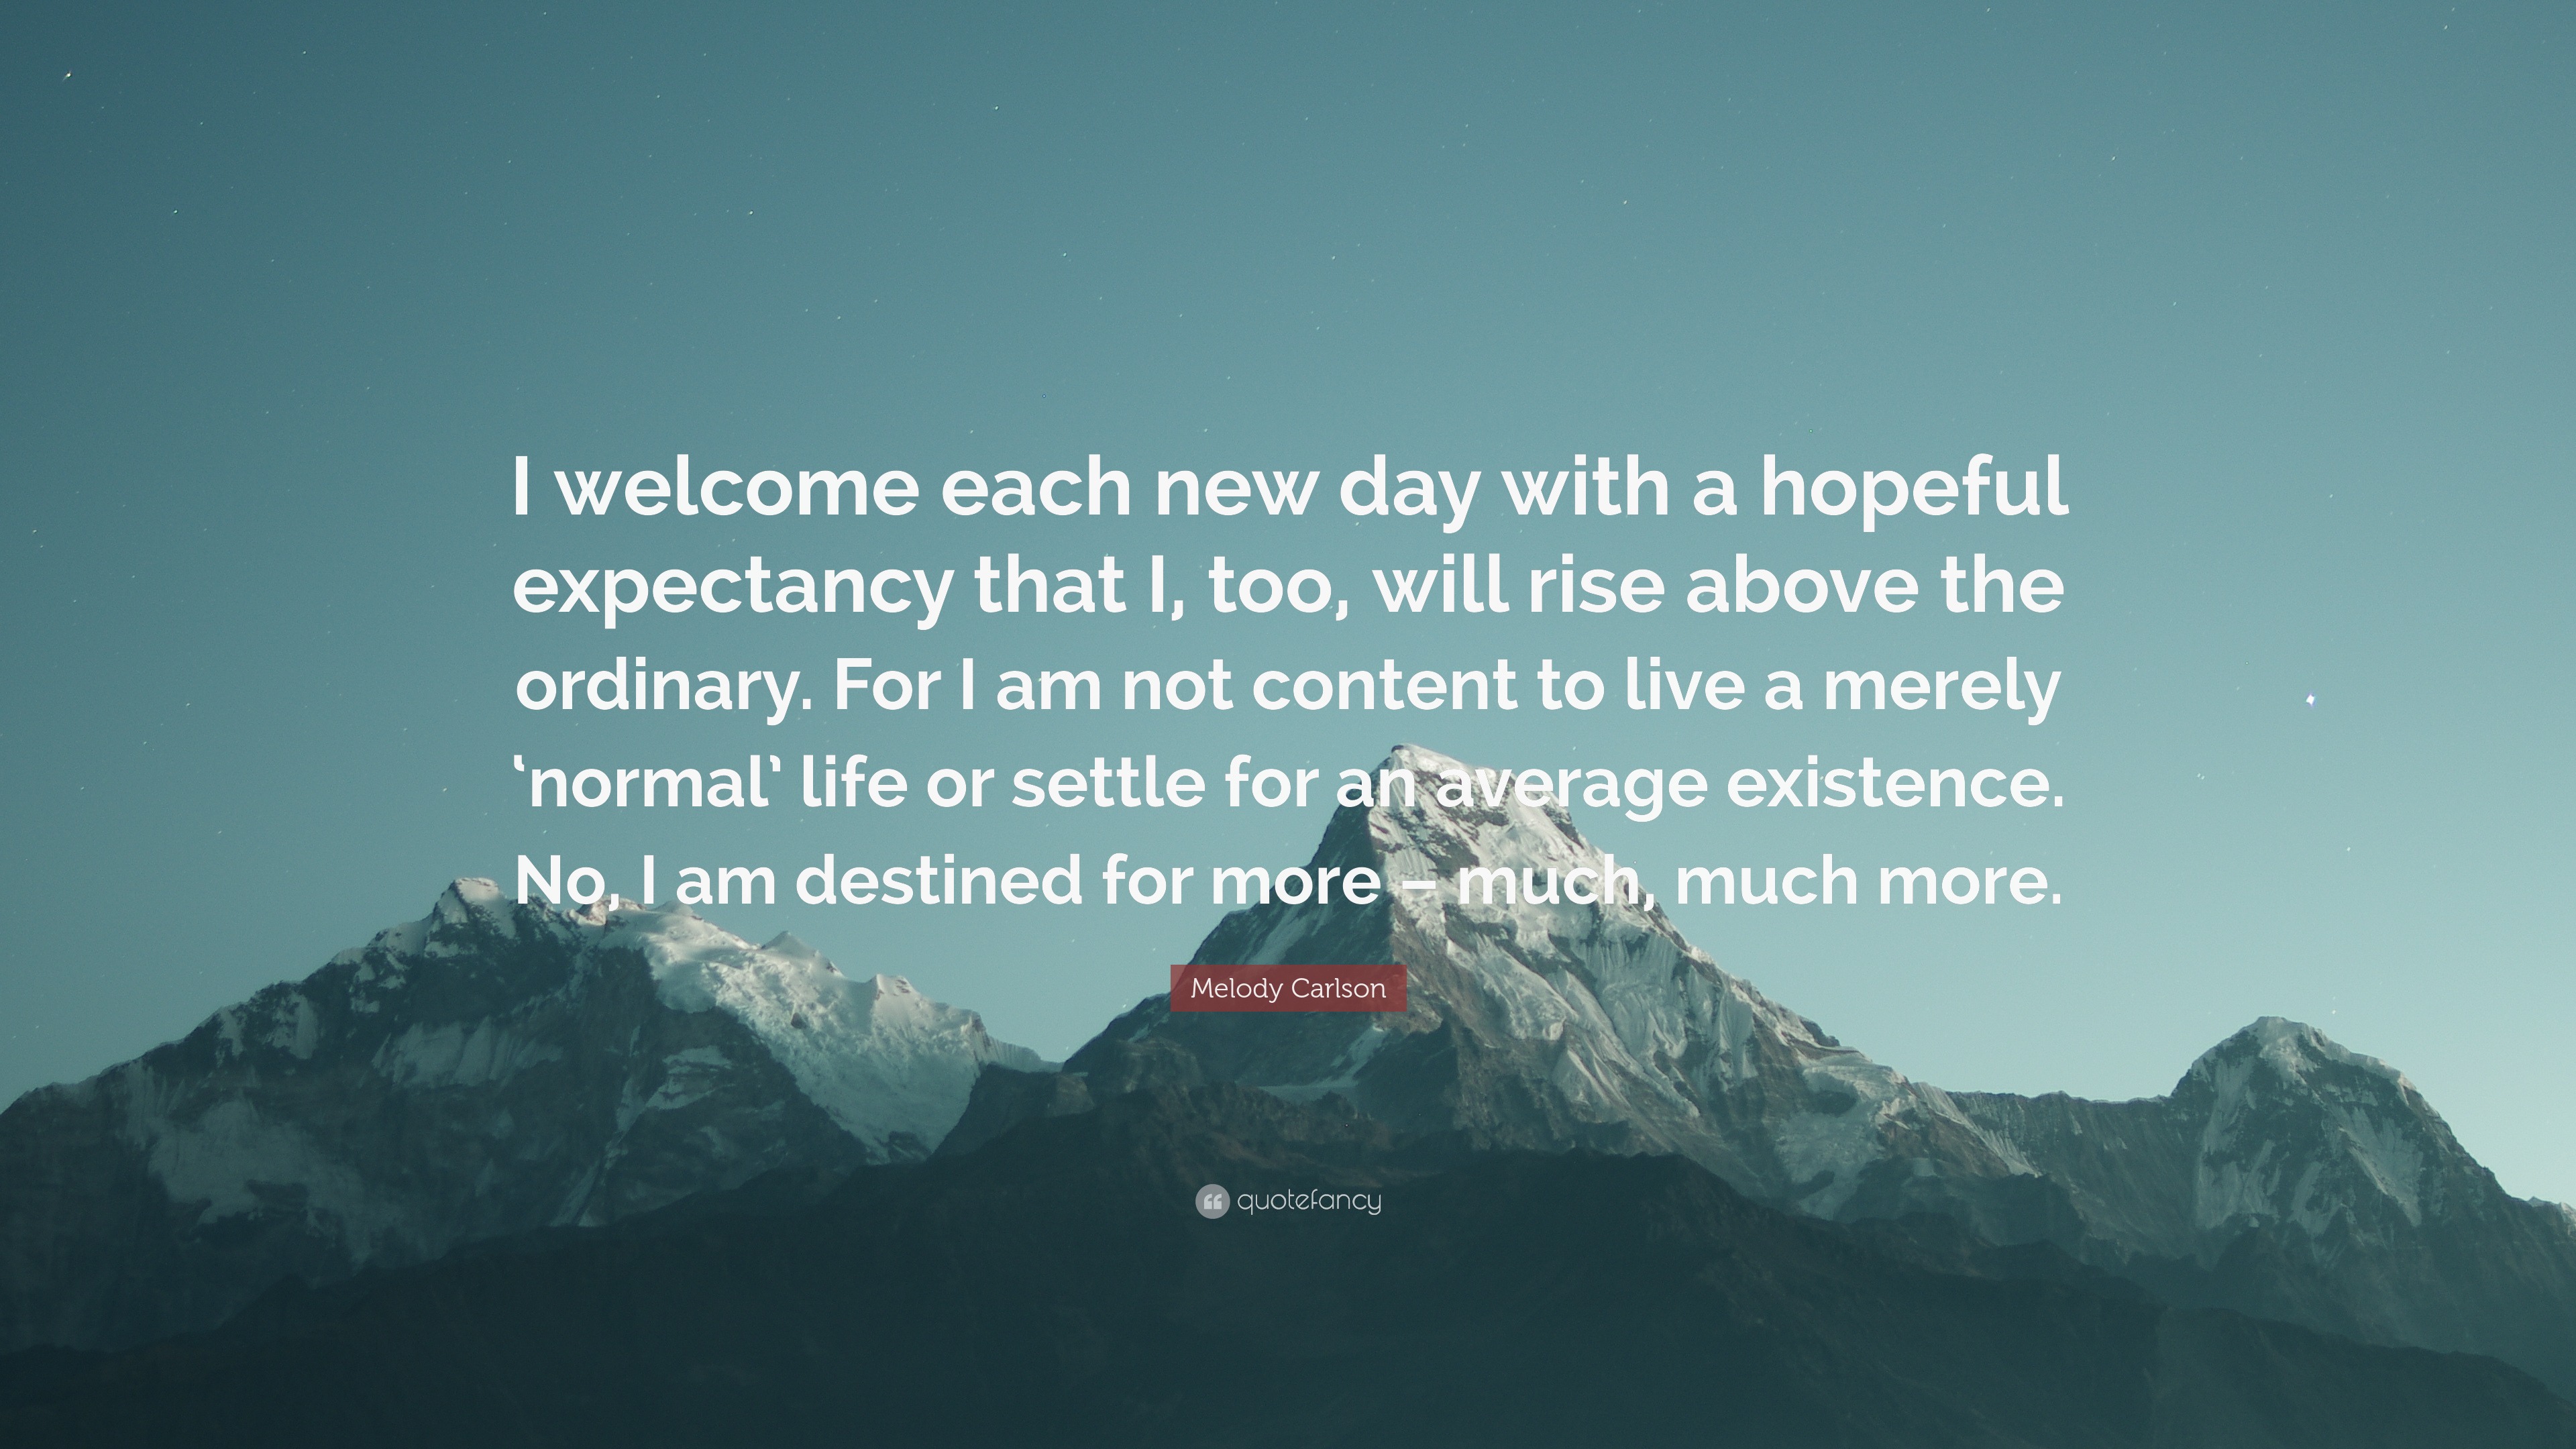 Melody Carlson Quote “I wel e each new day with a hopeful expectancy that I